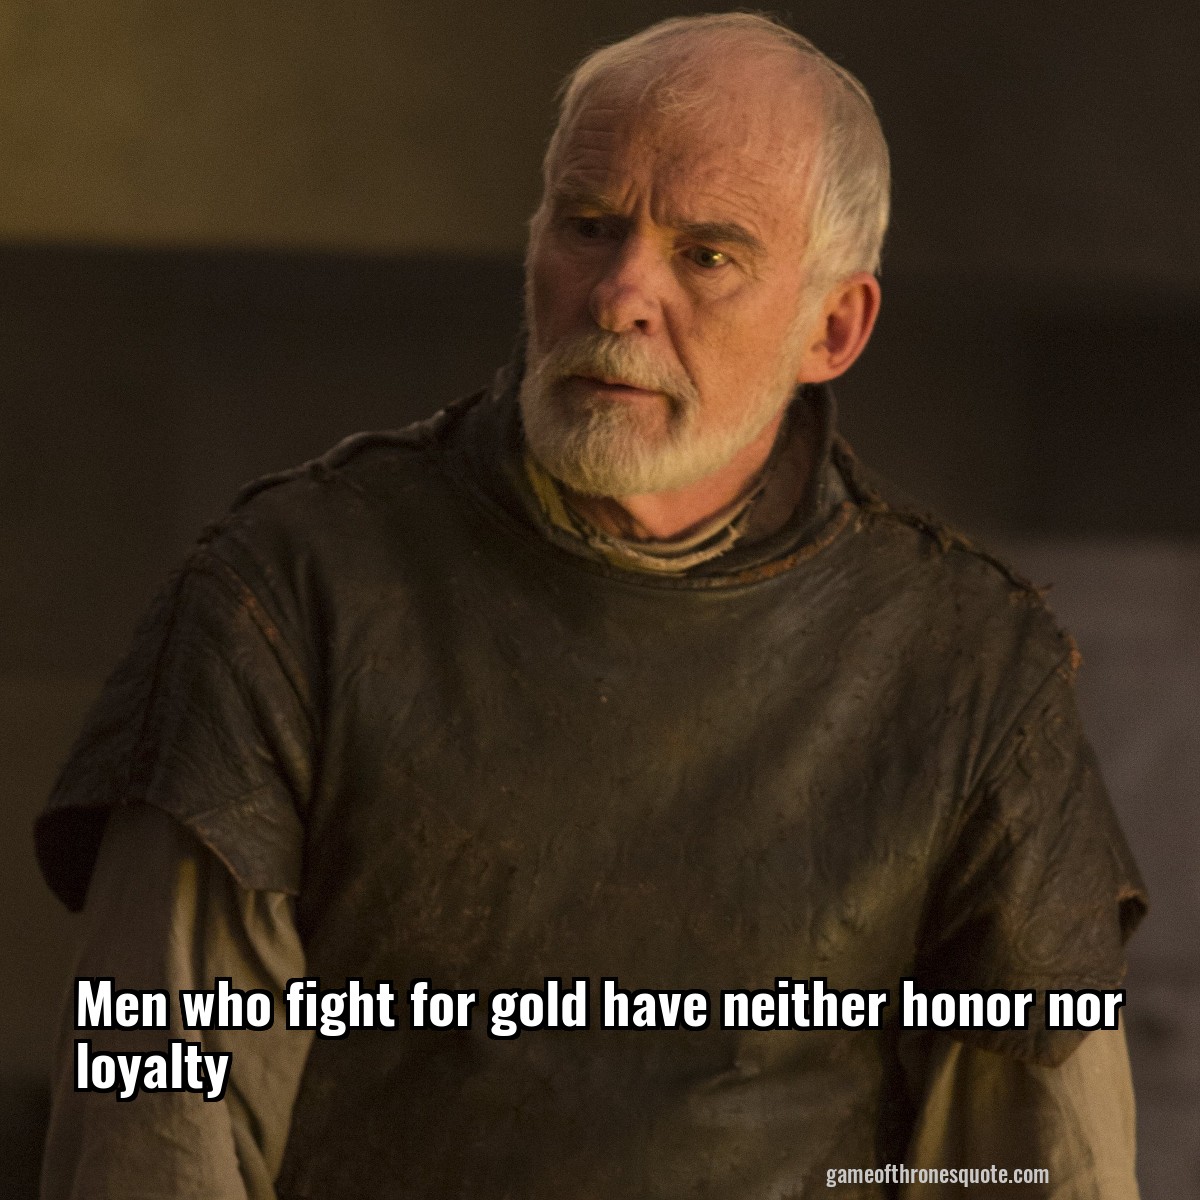 Men who fight for gold have neither honor nor loyalty